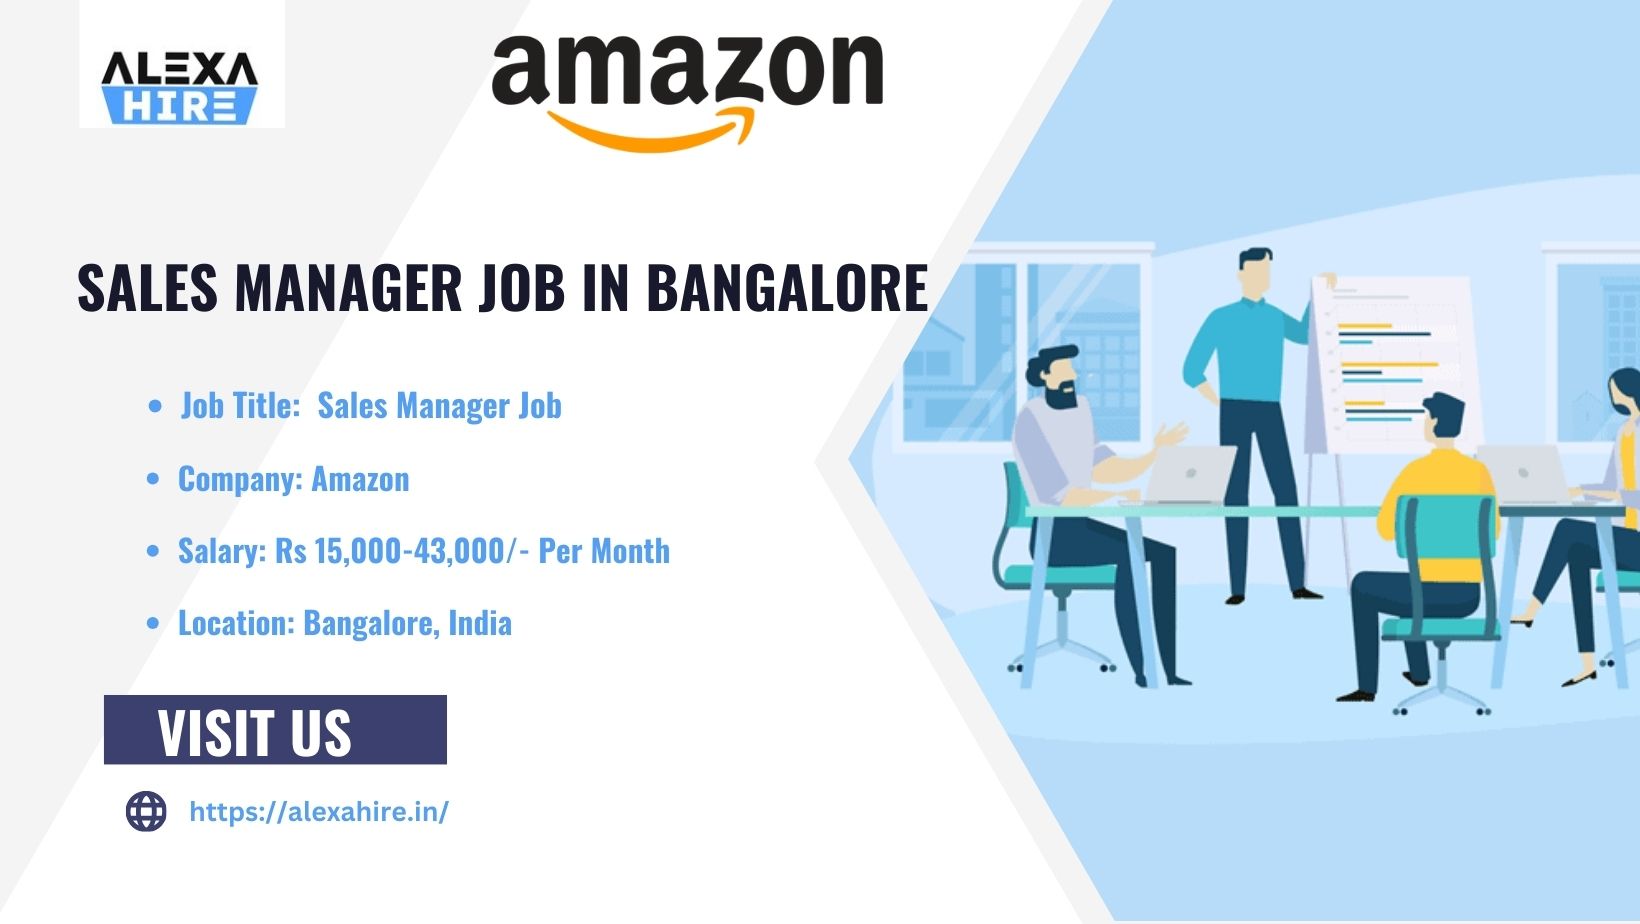 Amazon Hiring Sales Manager Job in Bangalore| Best Opportunity